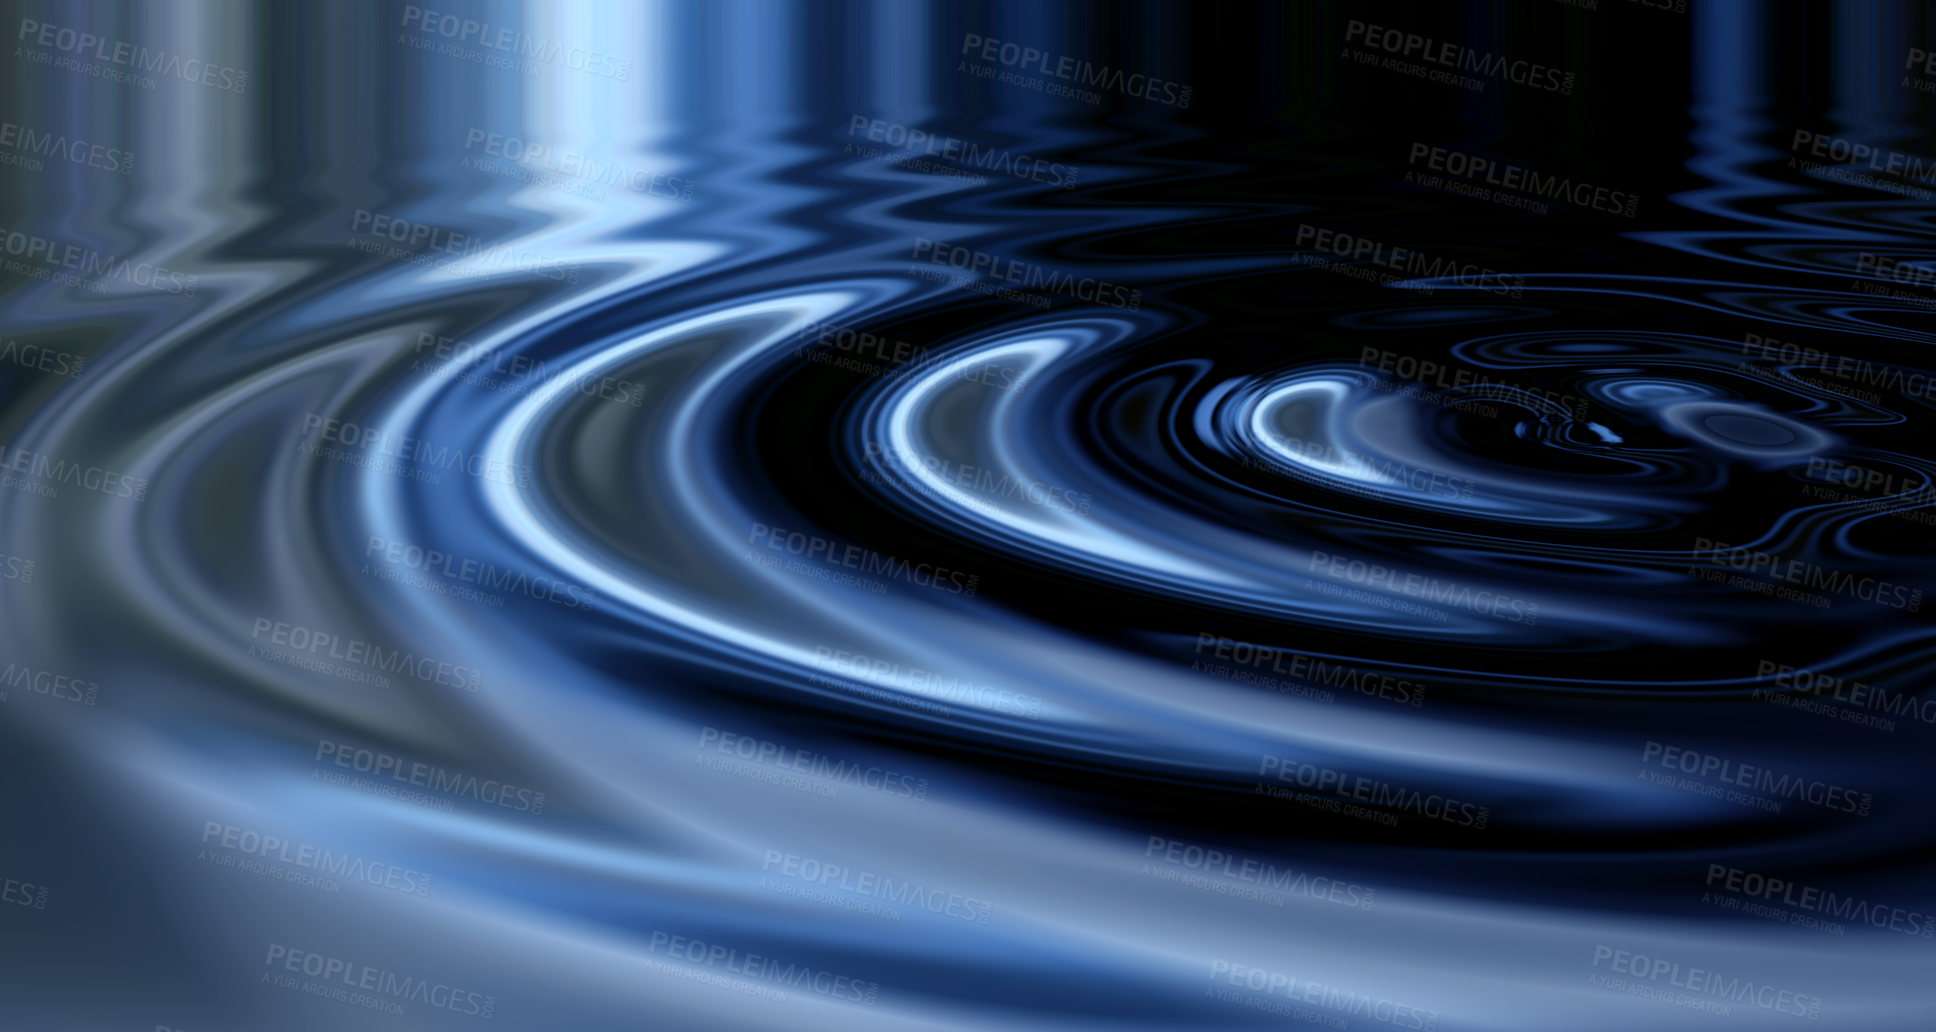 Buy stock photo Animated, 3D and VFX silver shiny waves making ripples in liquid blue color substance. Texture, movement and a futuristic pool with glowing water or fluid for a vaporwave aesthetic background